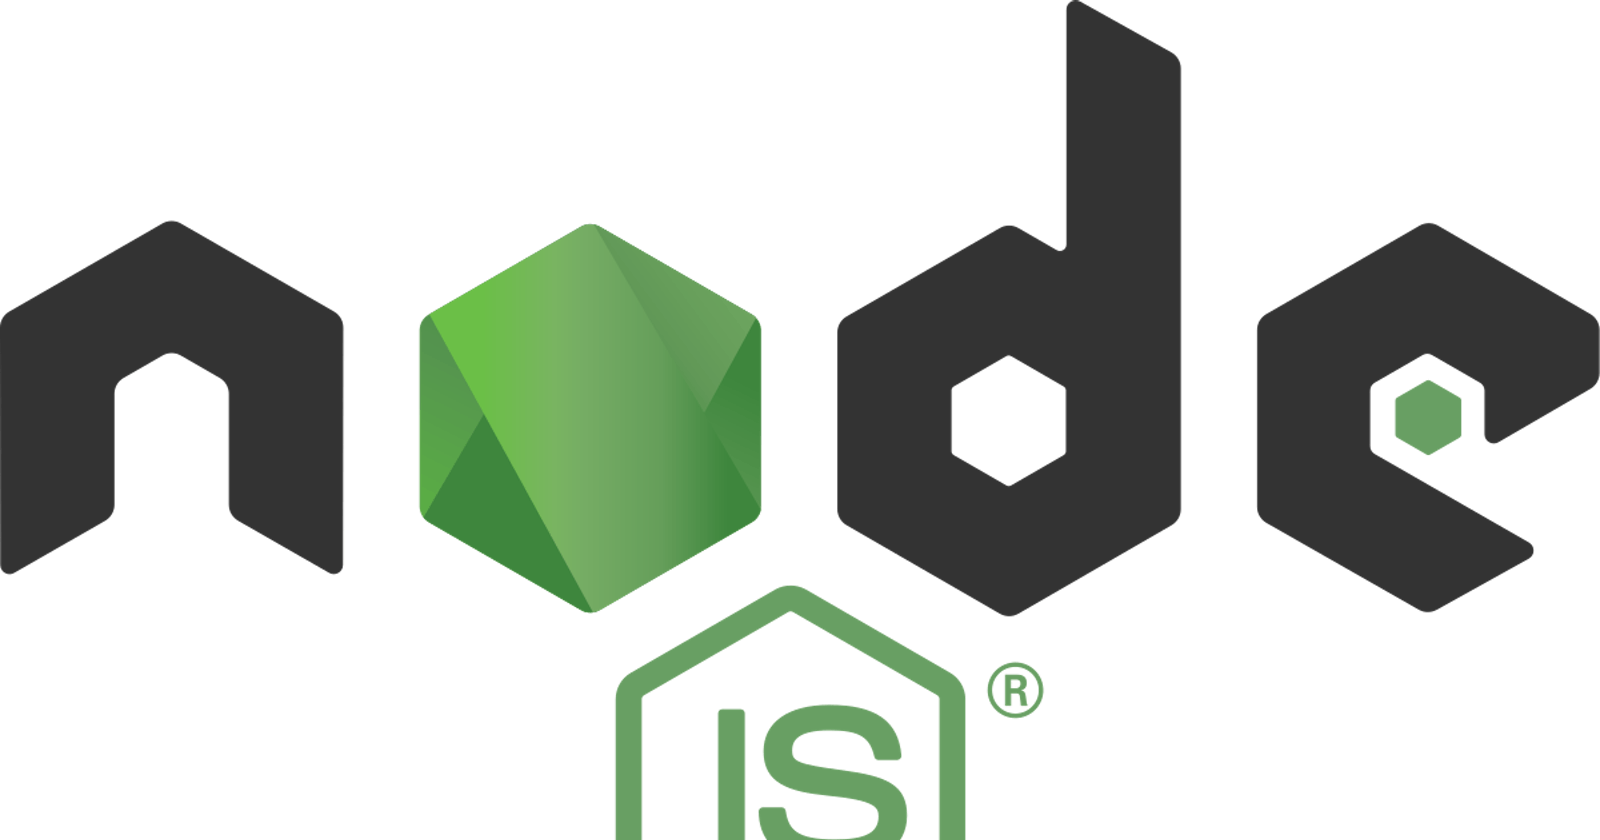 Learn about Node.js - Popular JavaScript Runtime ⚡